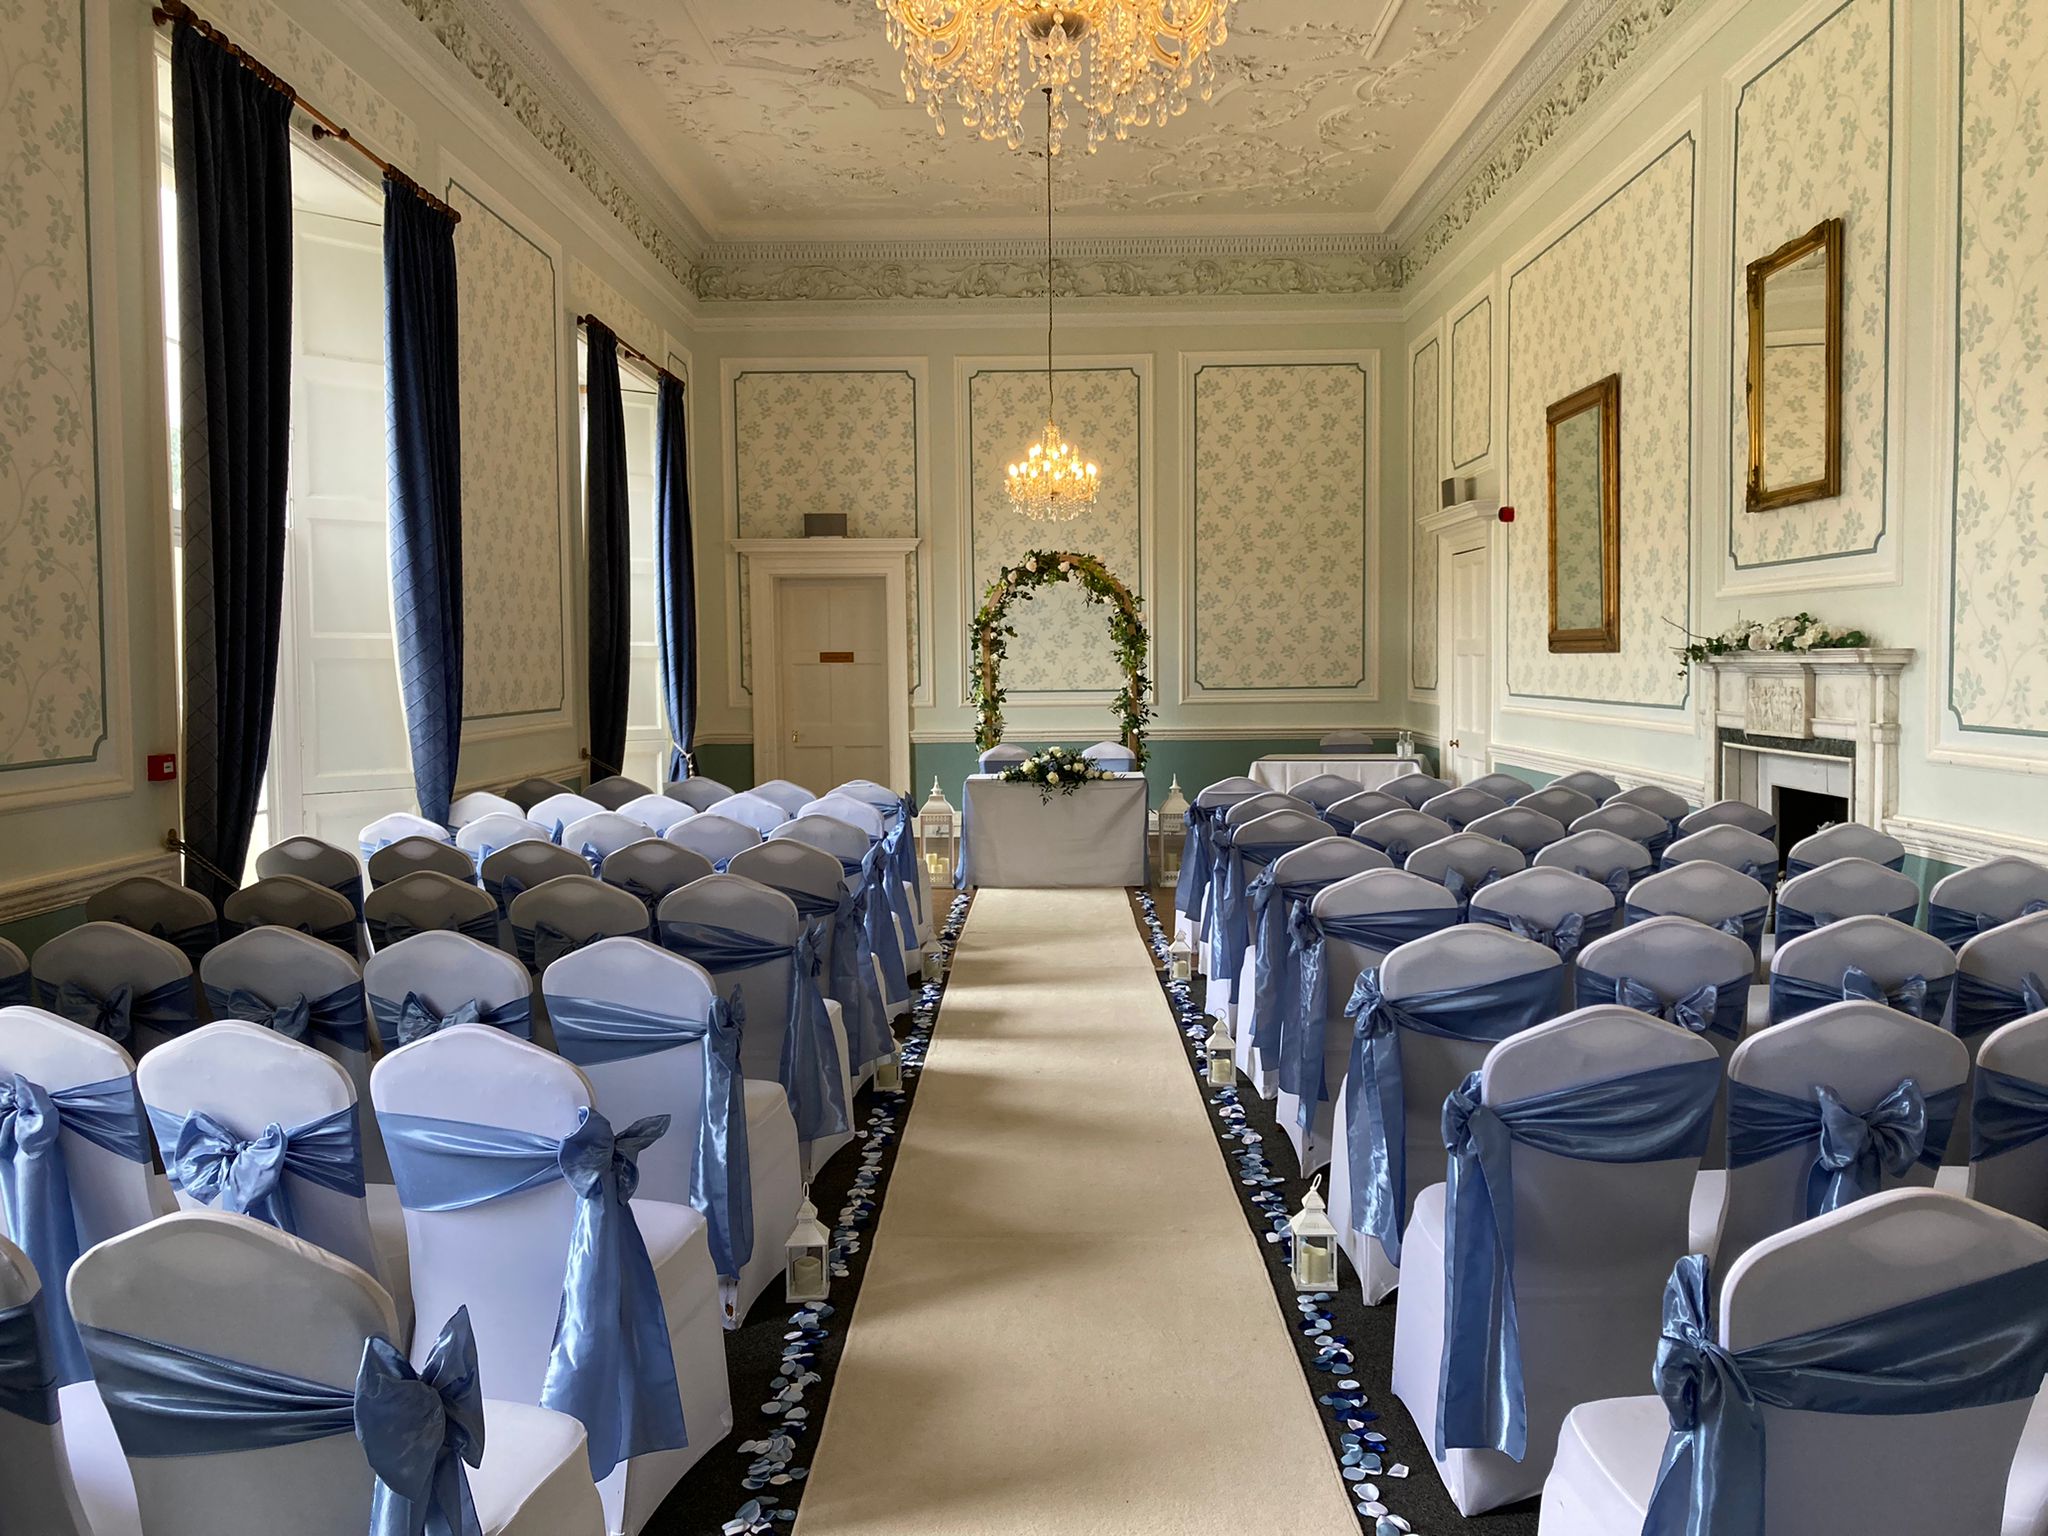 The Old Library room set up for a wedding ceremony with a flower arch in the middle of the aisle